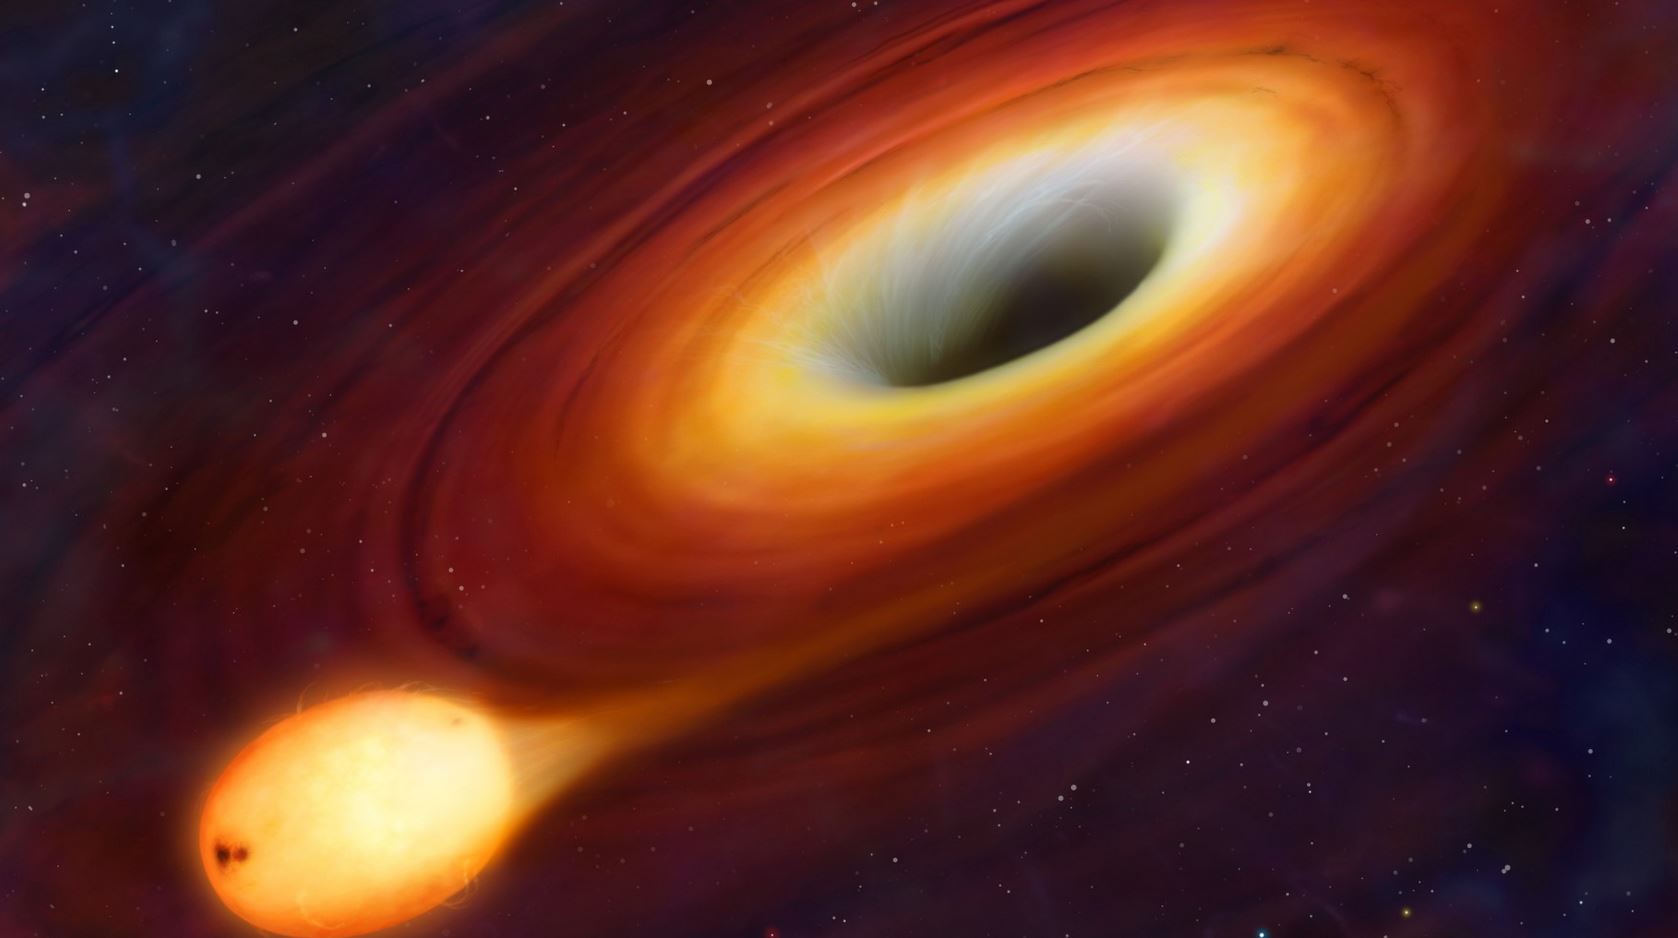 NASA Detects Black Hole Eruption For The First Time in 26 Years